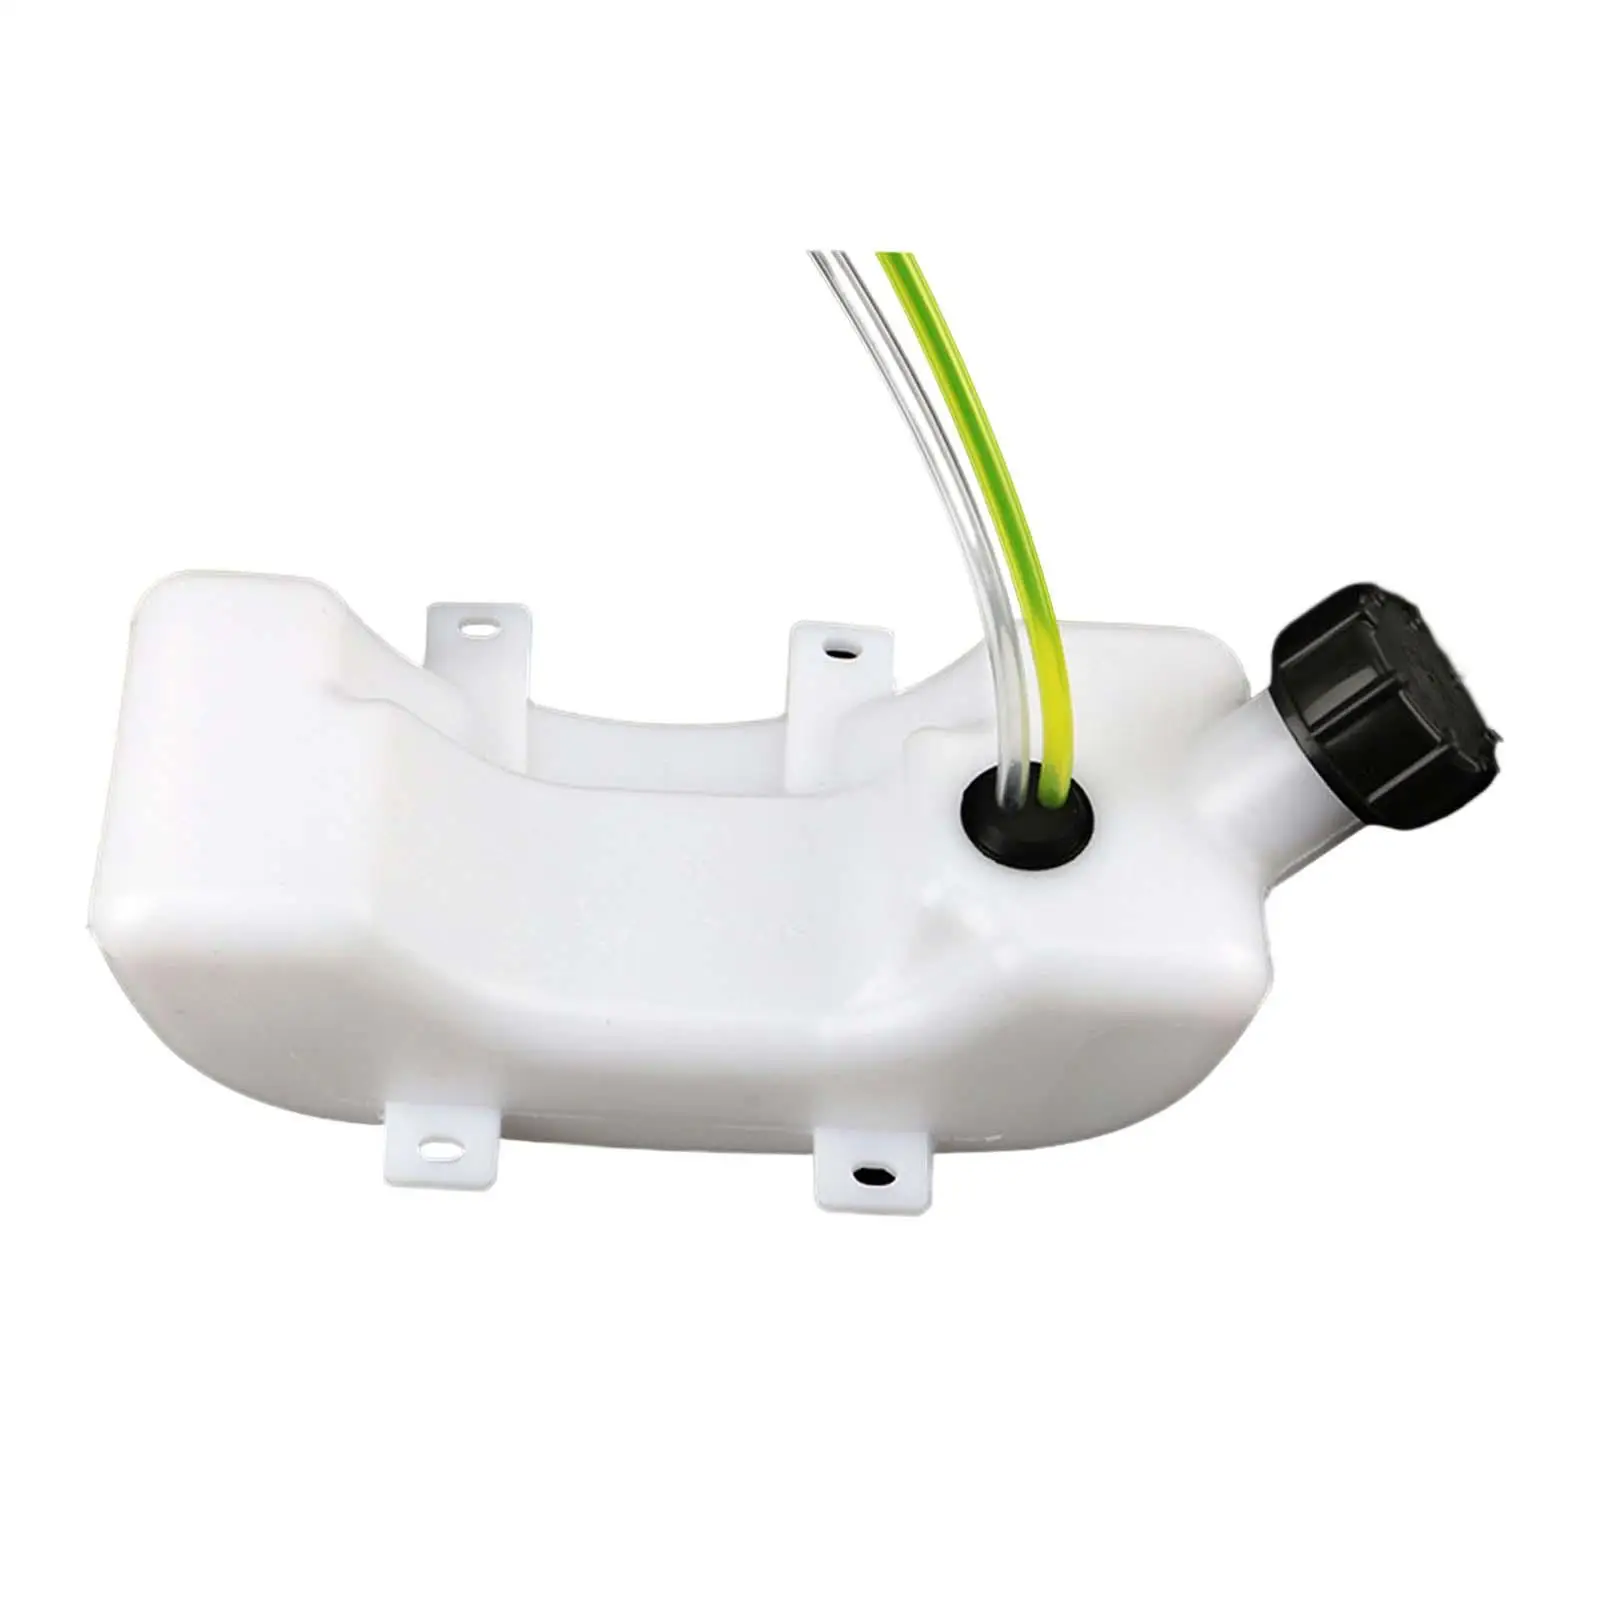 Trimmer Fuel Tank Durable Easily Install Fuel Tank with Fuel Lines and Filter for Lawn, Agricultural Garden, Accessories